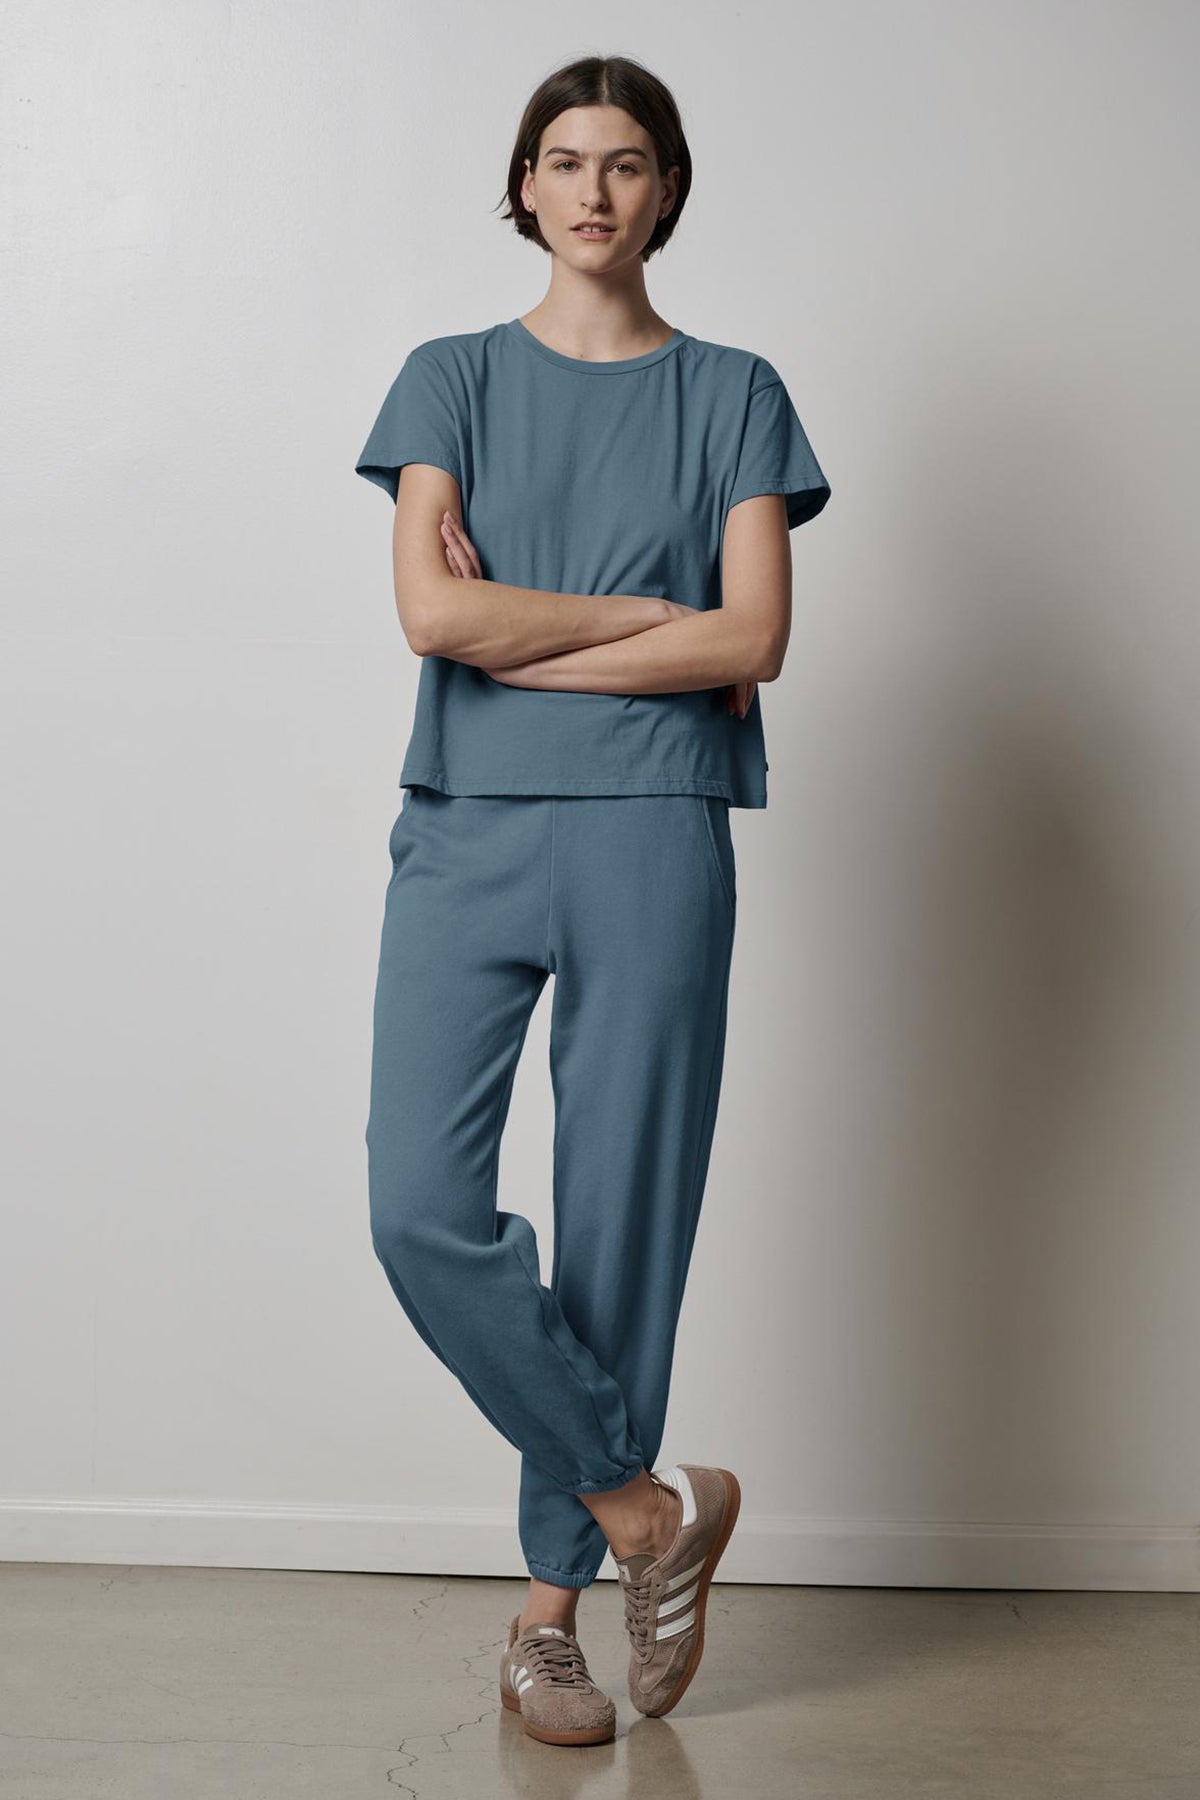 A woman standing with arms crossed wearing a casual blue t-shirt and Velvet by Jenny Graham ZUMA SWEATPANT outfit with brown sneakers.-36594727977153